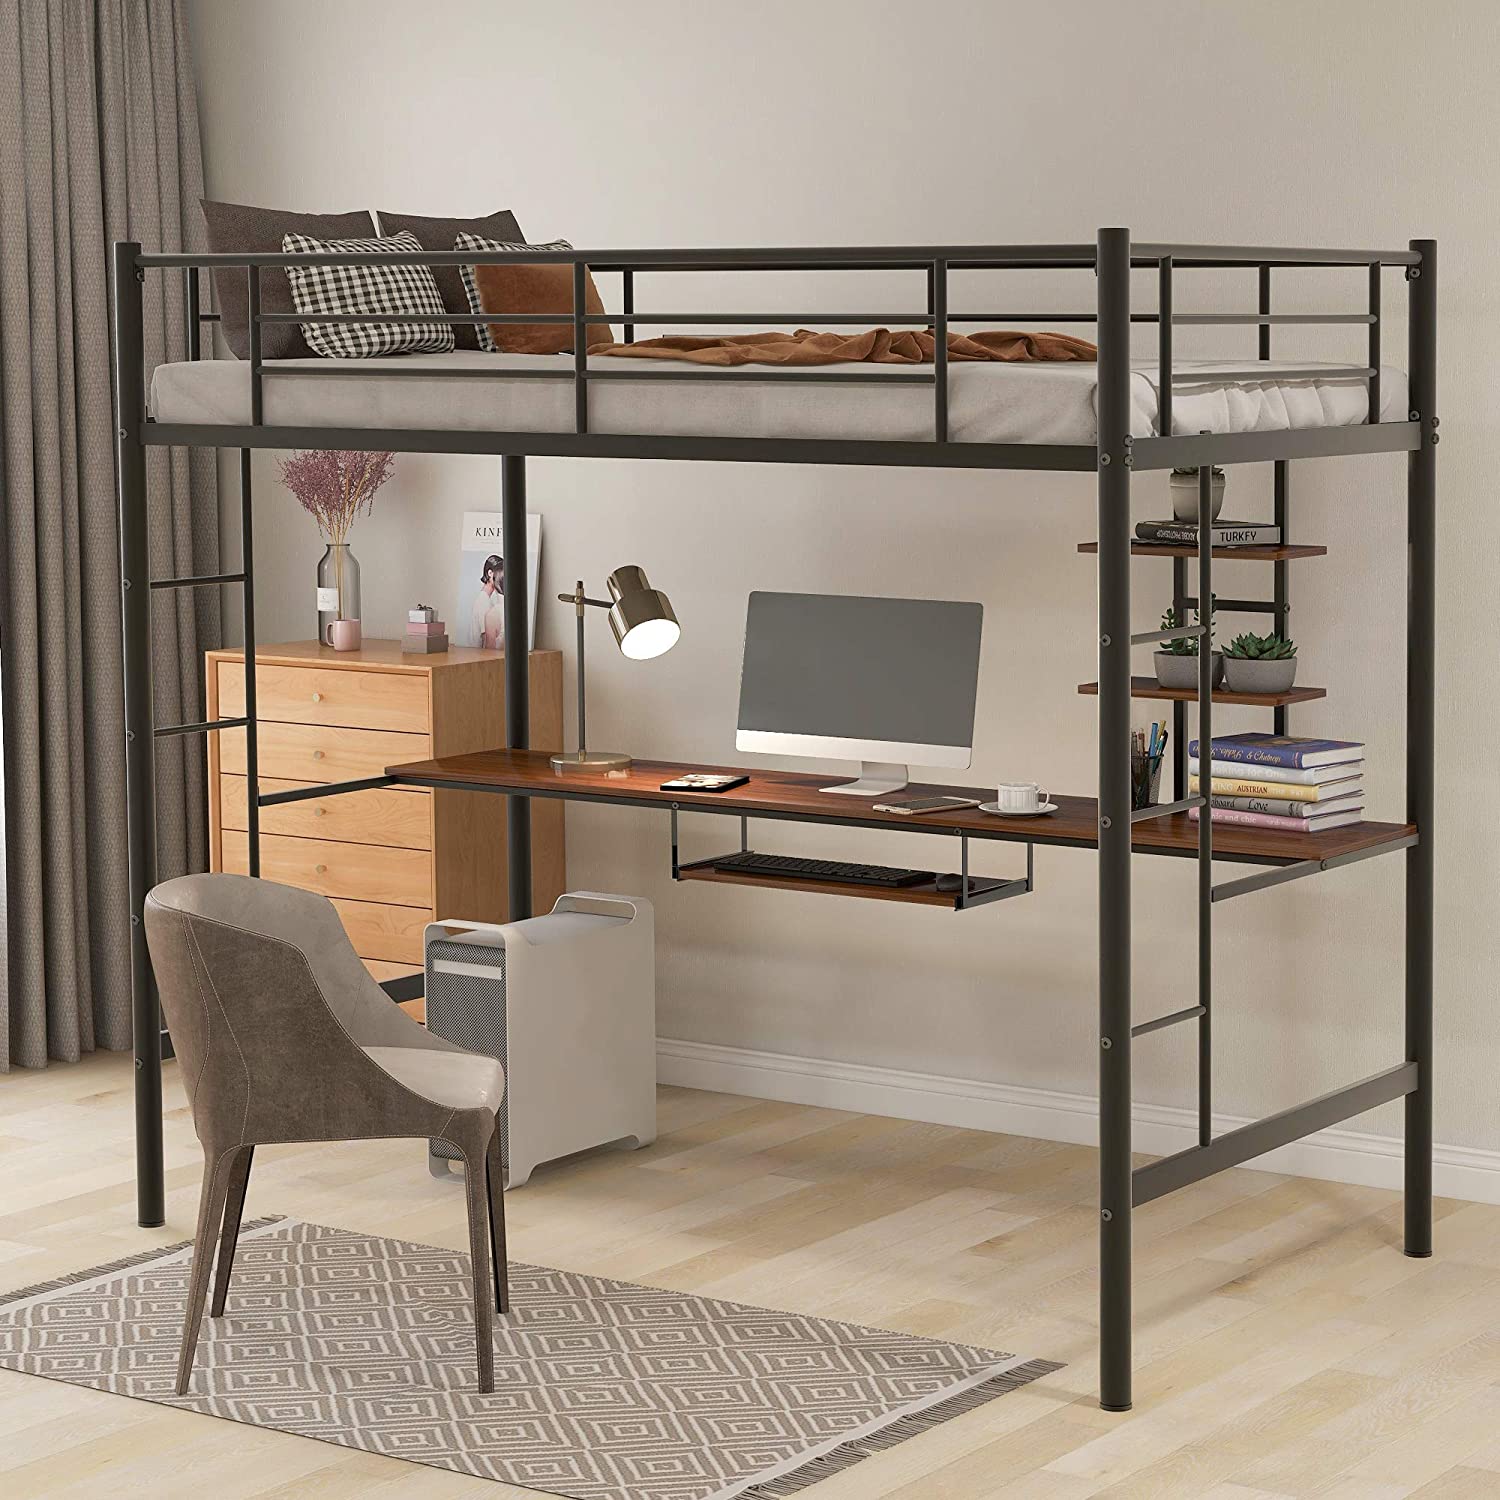 a desk loft bed for a home office